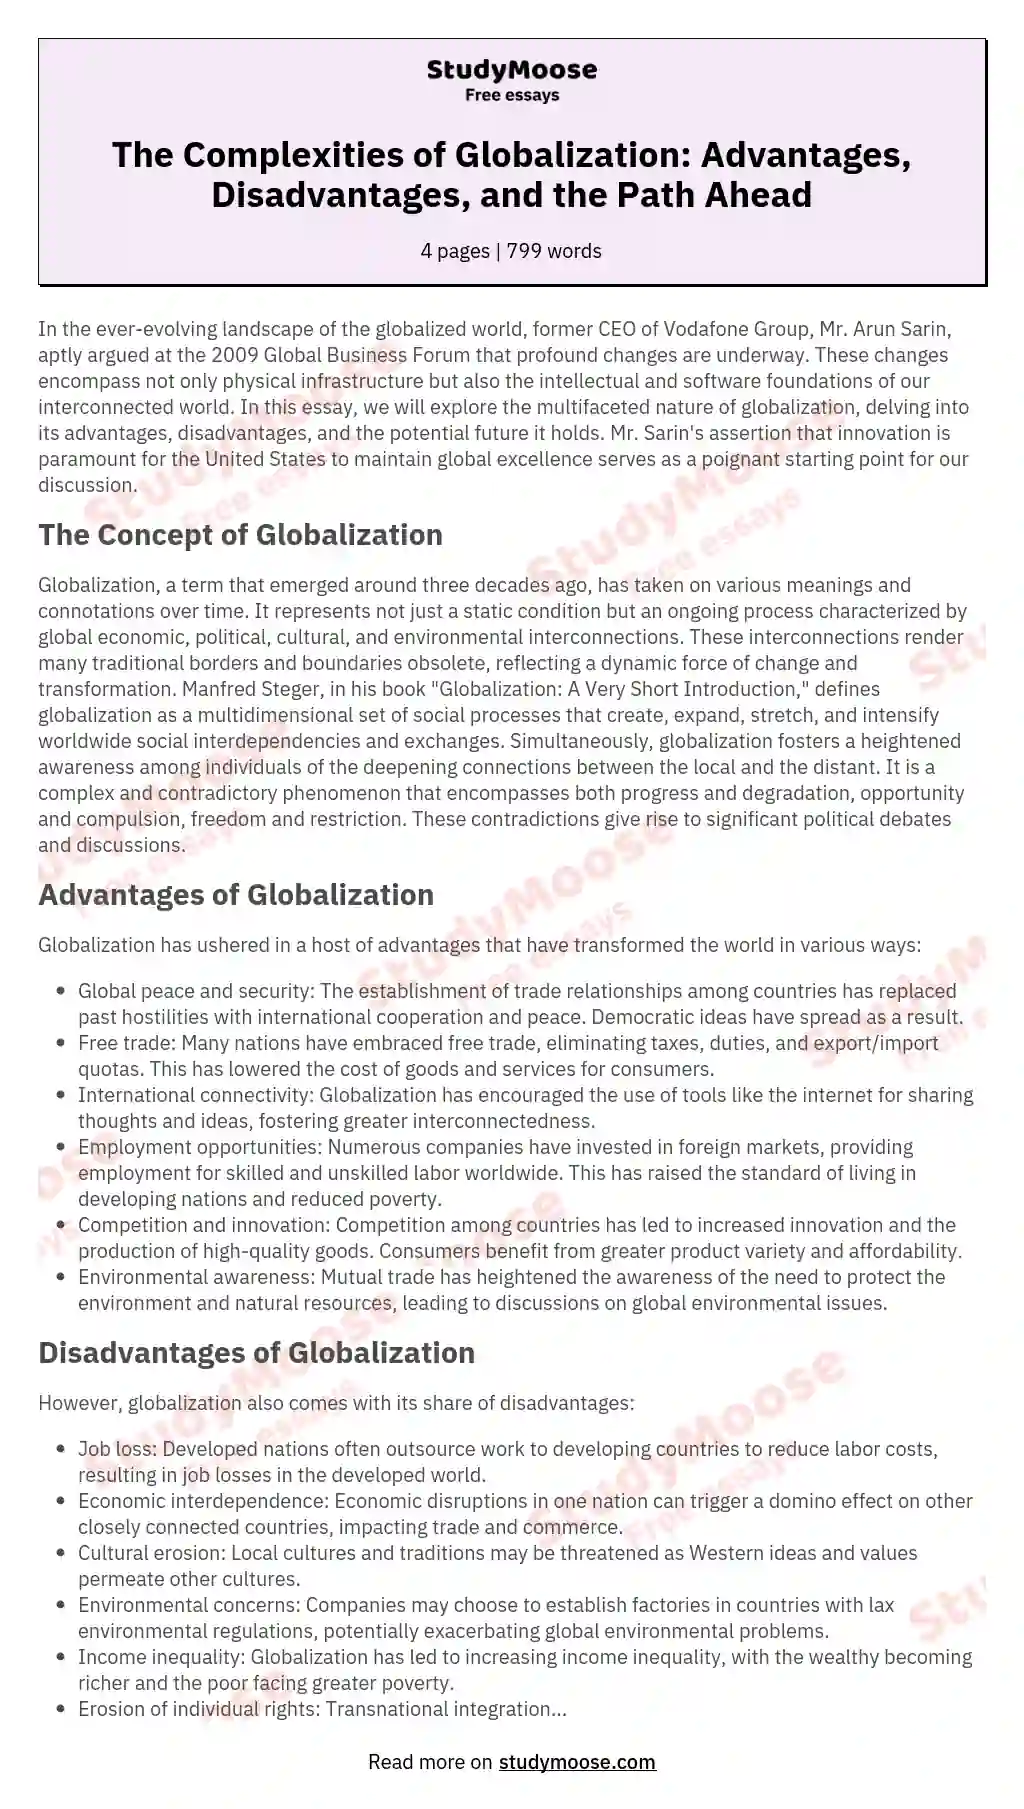 The Complexities of Globalization: Advantages, Disadvantages, and the Path Ahead essay